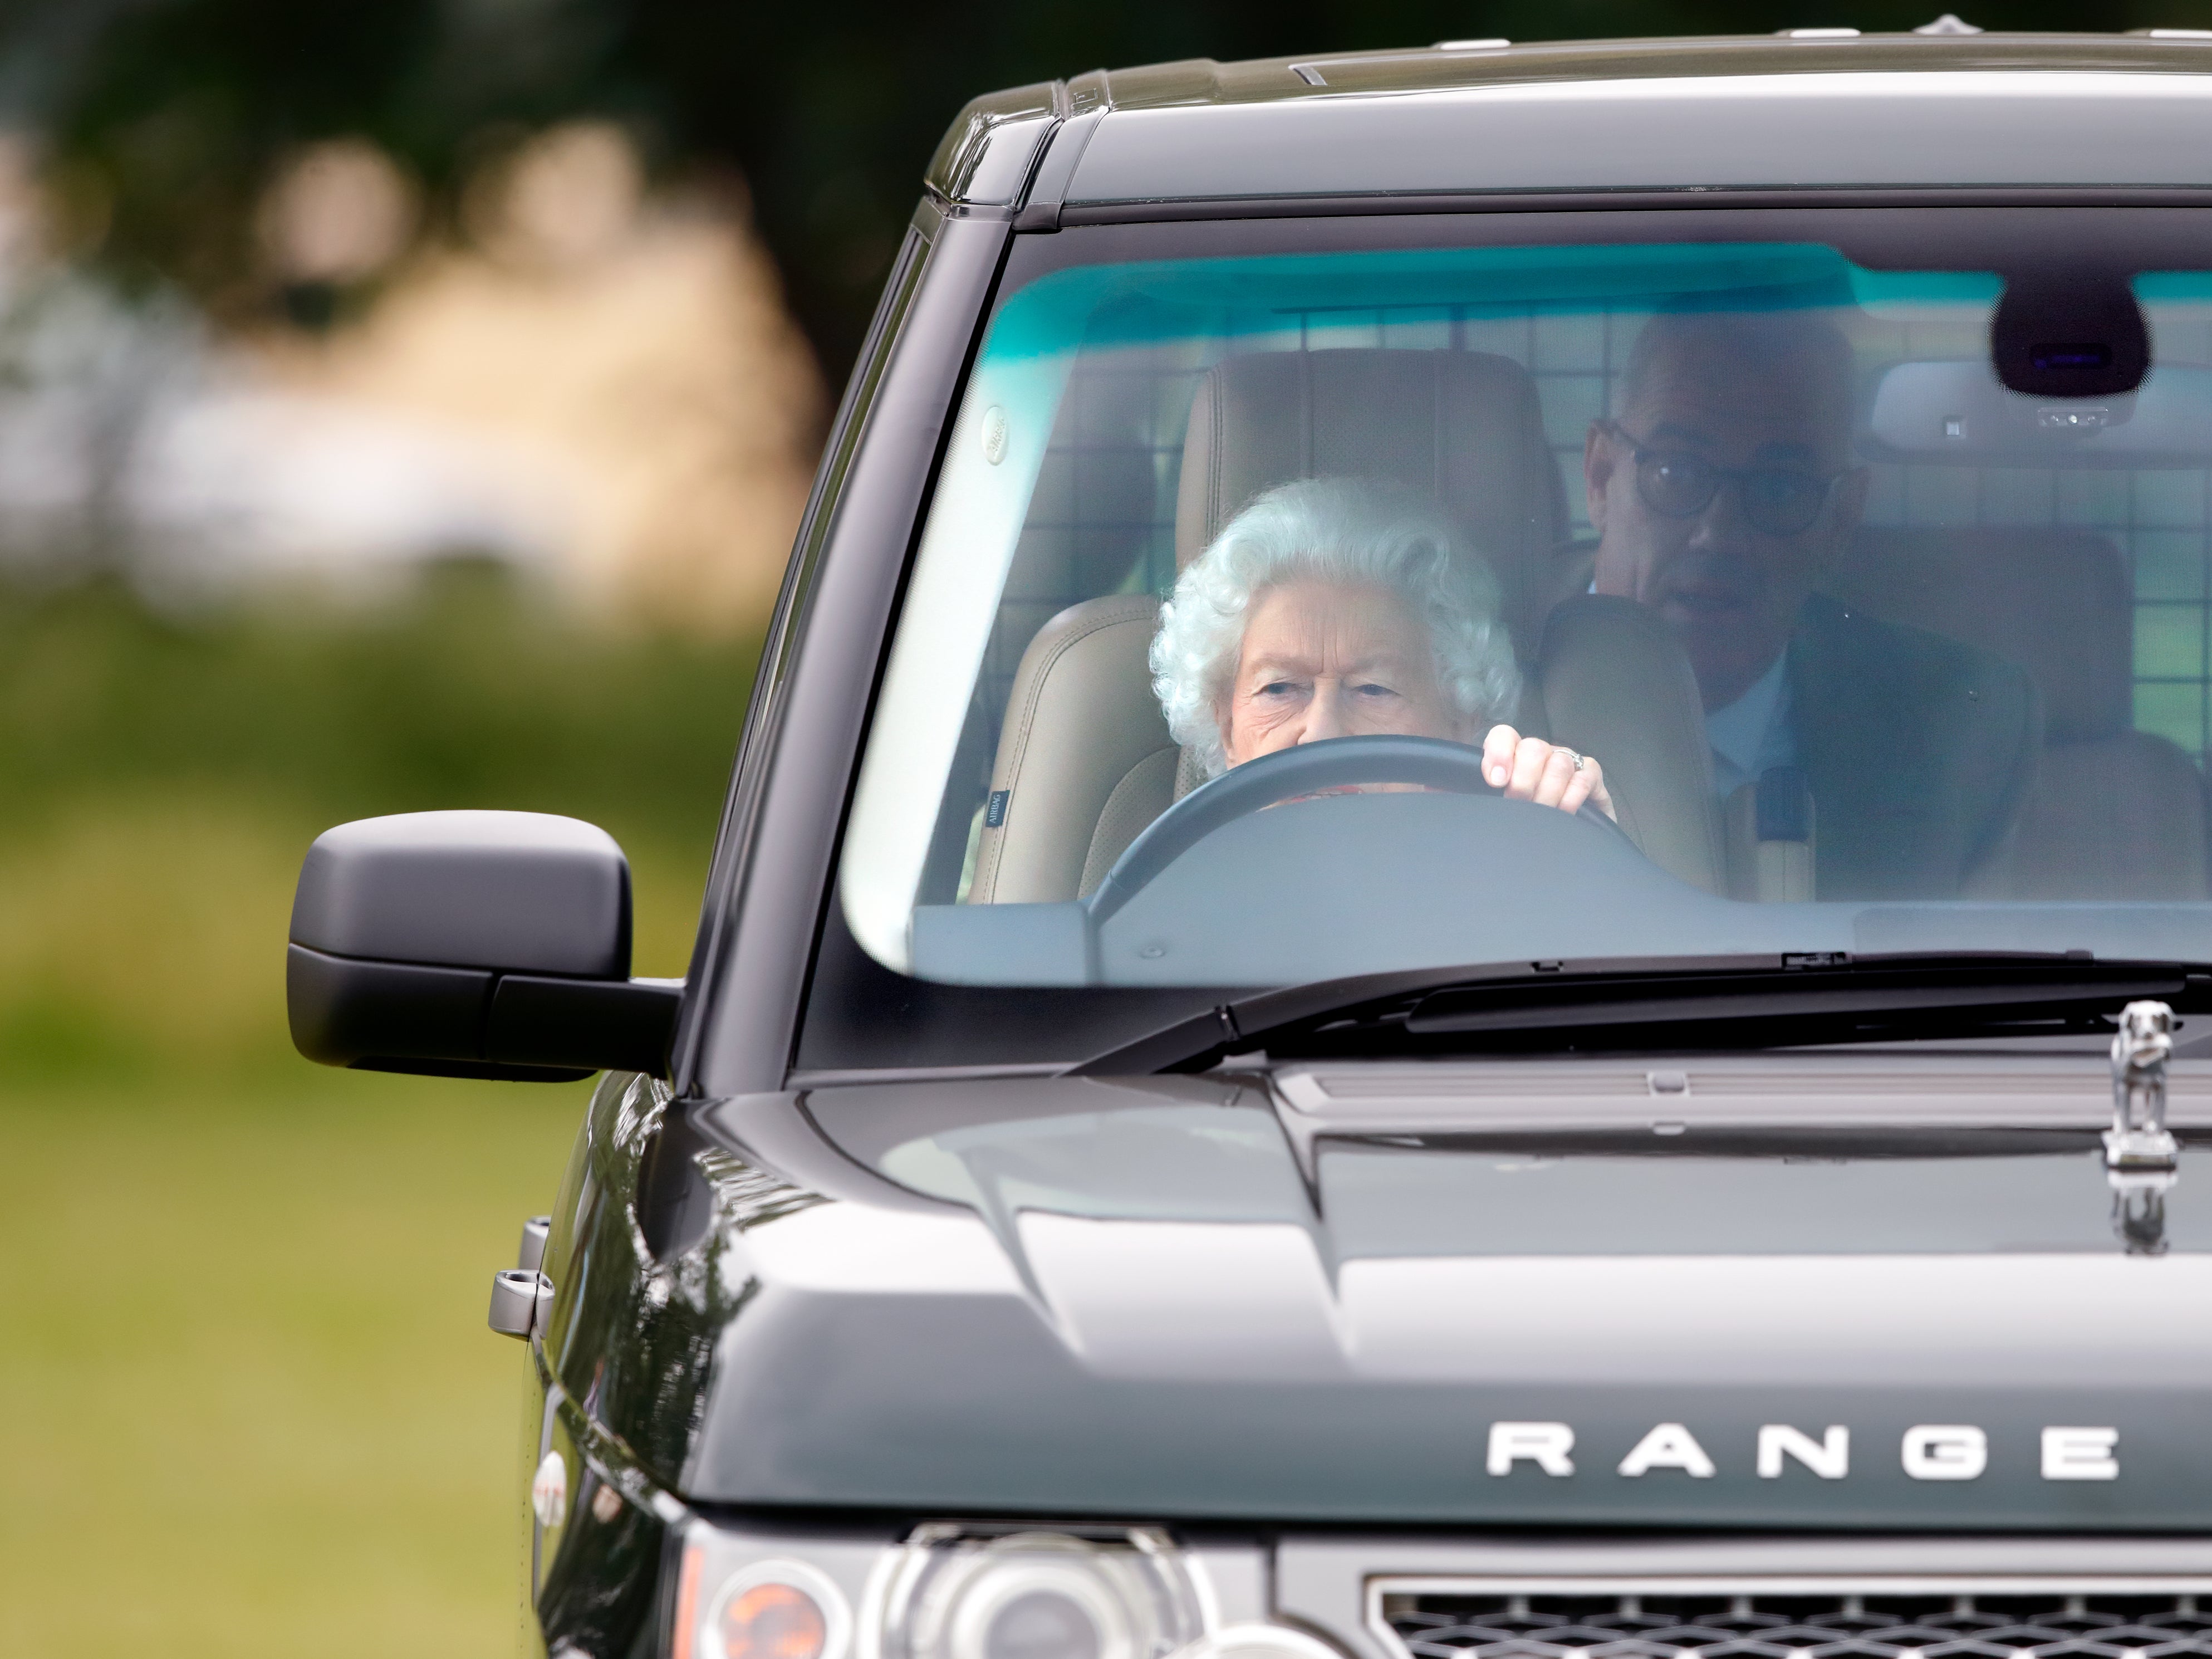 Queen Elizabeth II seen driving her Range Rover car as she attends day 2 of the Royal Windsor Horse Show in Home Park, Windsor Castle